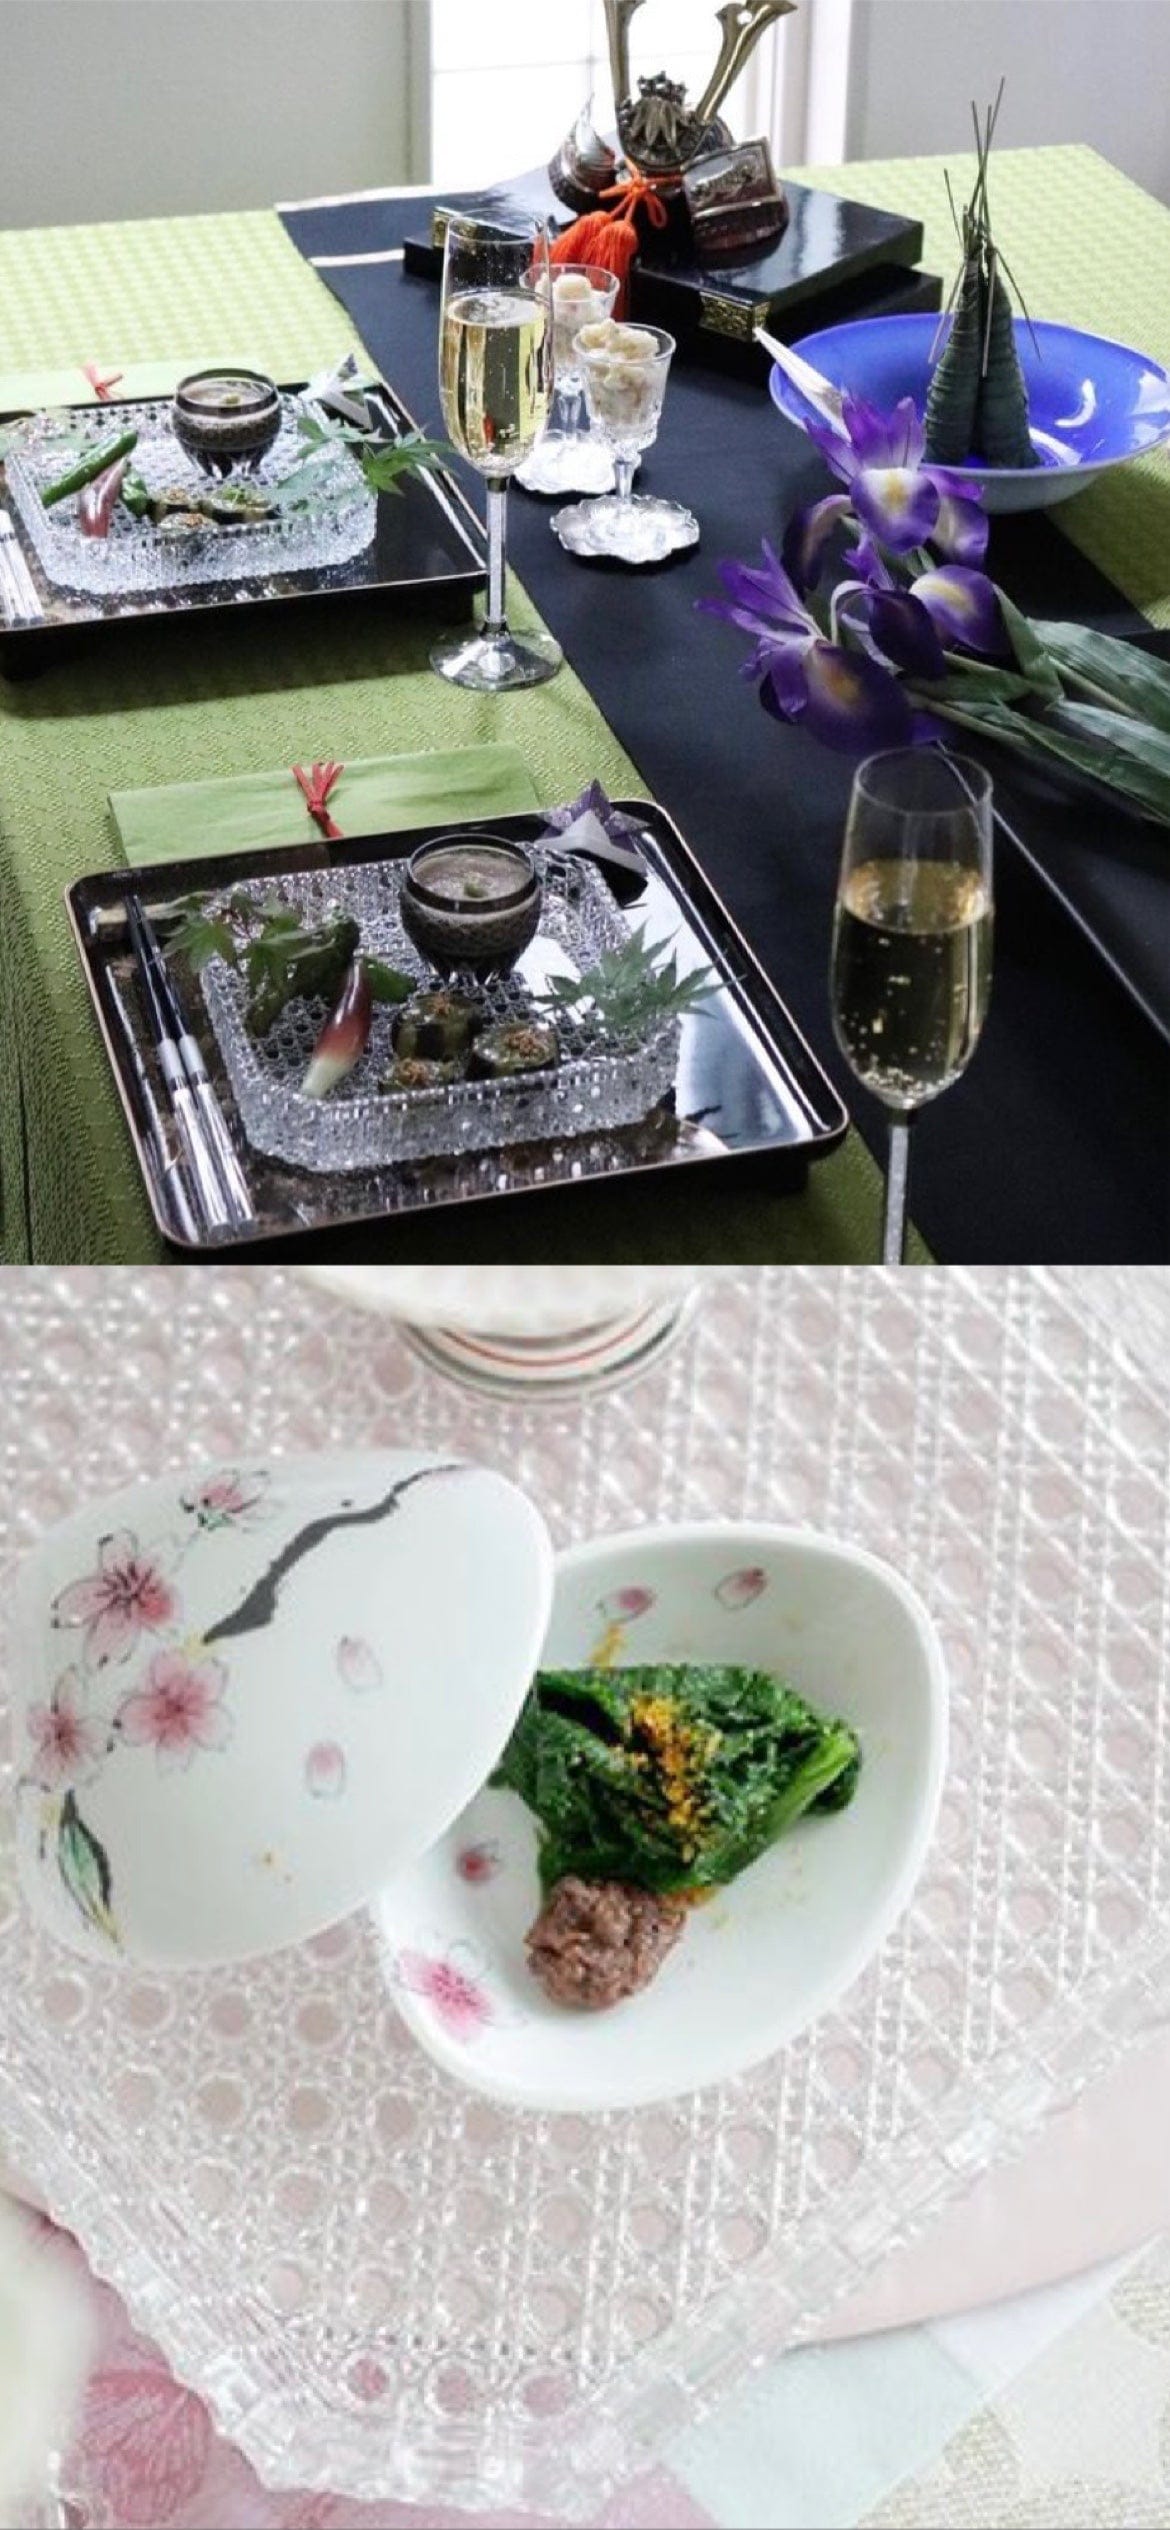 JAPAN TRADITIONAL HAND CUT HIGH QUALITY GLASS CRYSTAL SERVING PLATE